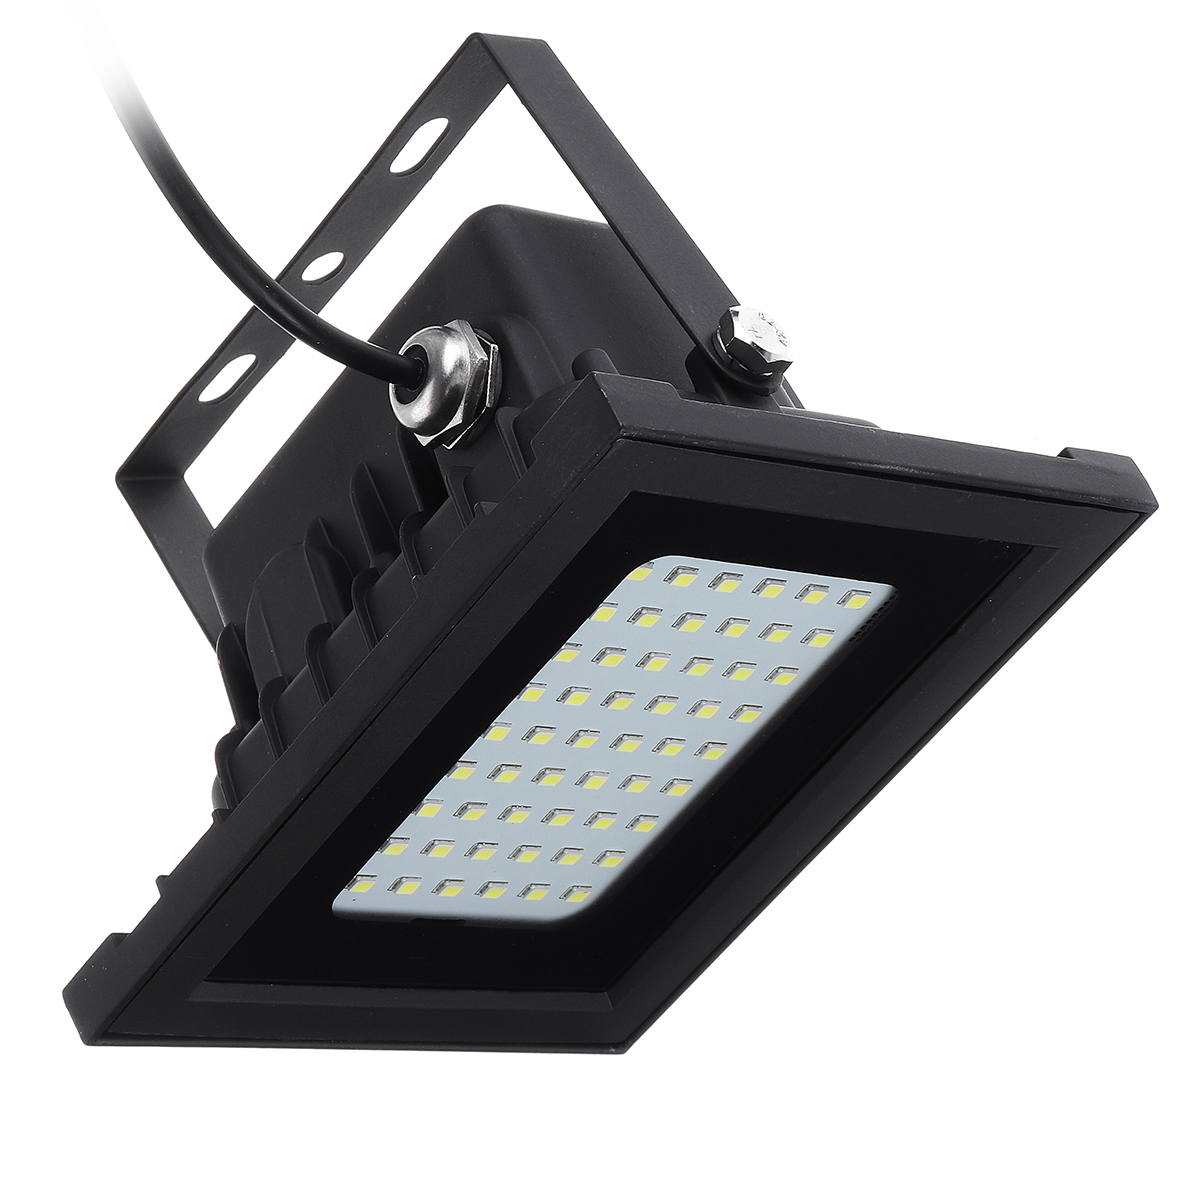 400LM 54 LED Solar Panel Flood Light Spotlight Project Lamp IP65 Waterproof Outdoor Camping Emergency Lantern With Remote Control 47